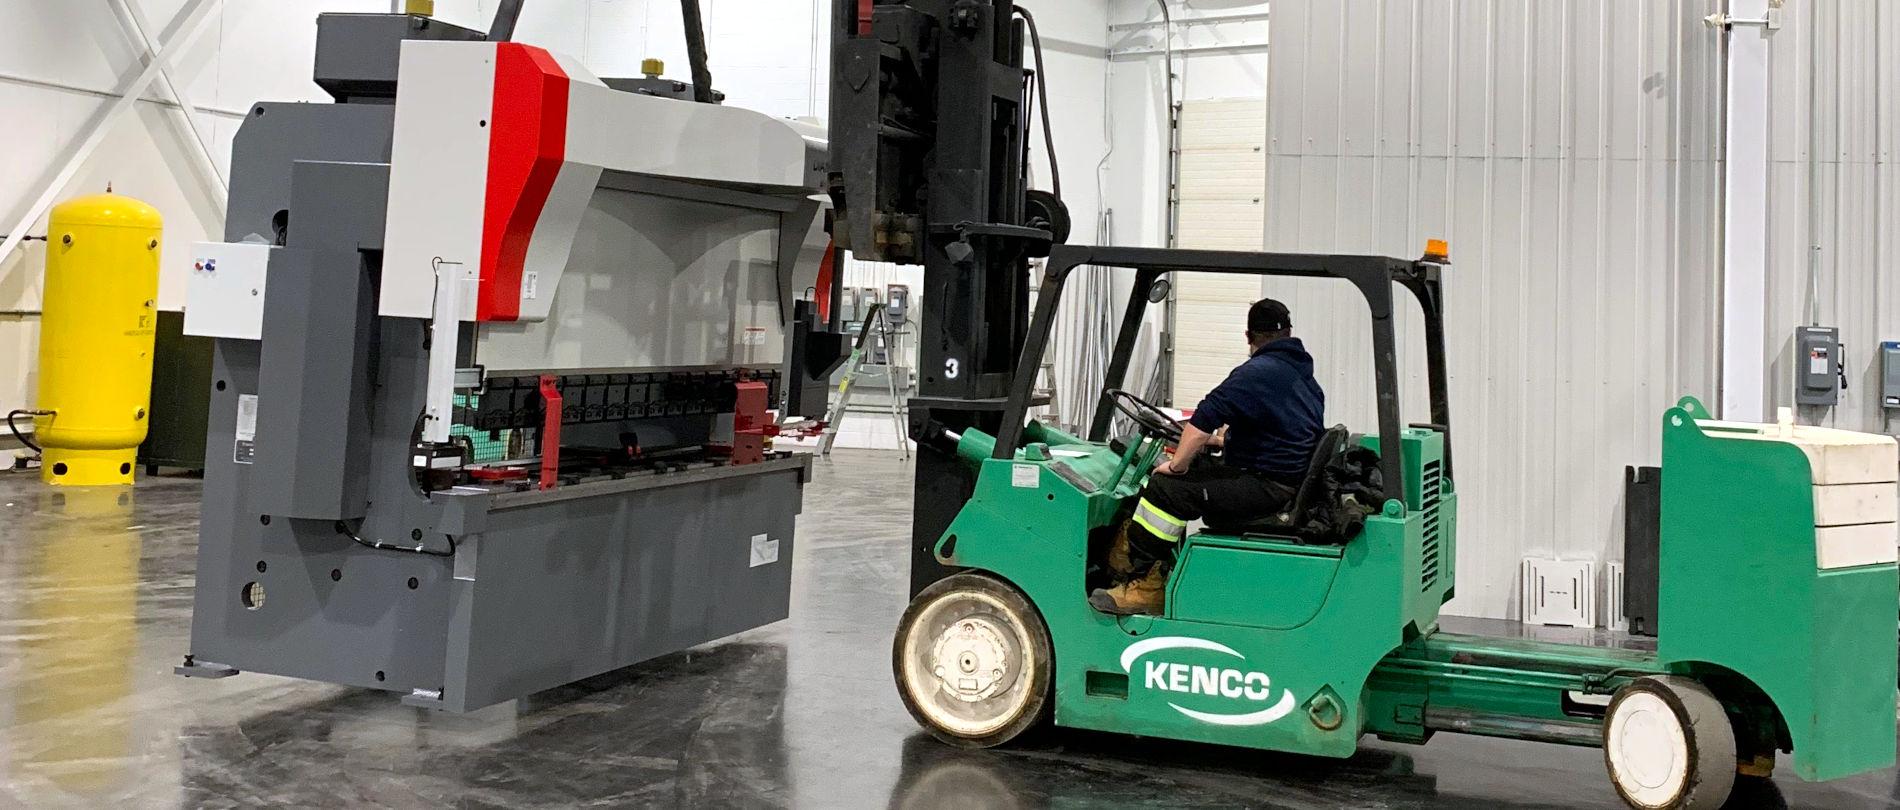 Kenco Machinery Movers and Millwrights Ltd